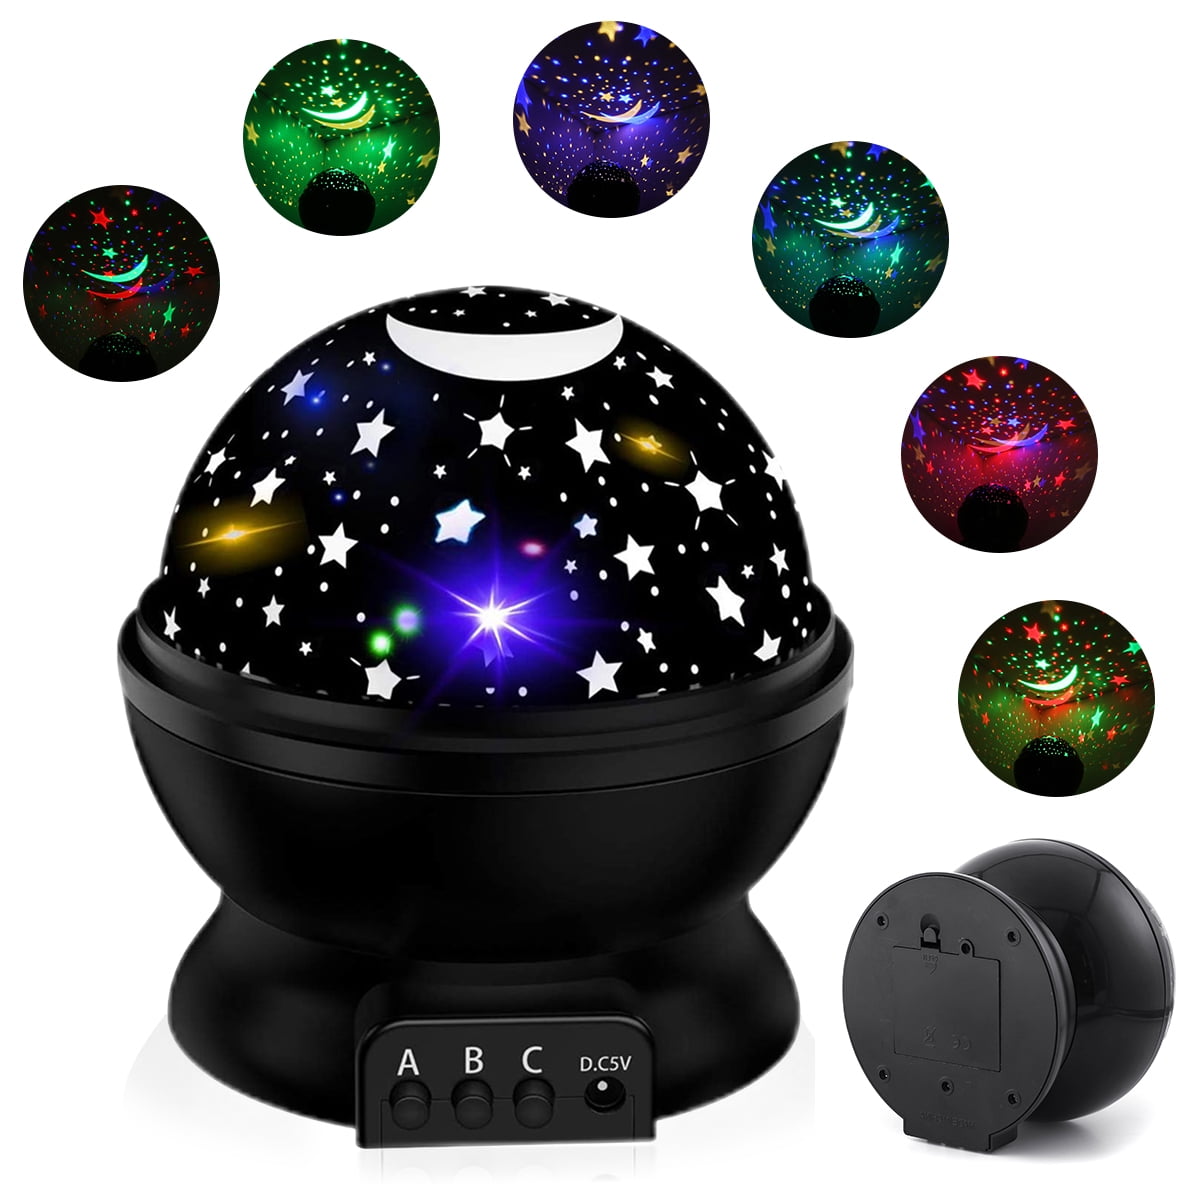 SUIBIAN Star Projector Lamp Led The Charge Rotating Atmosphere Nightlight Gifts Children Birthday Gift